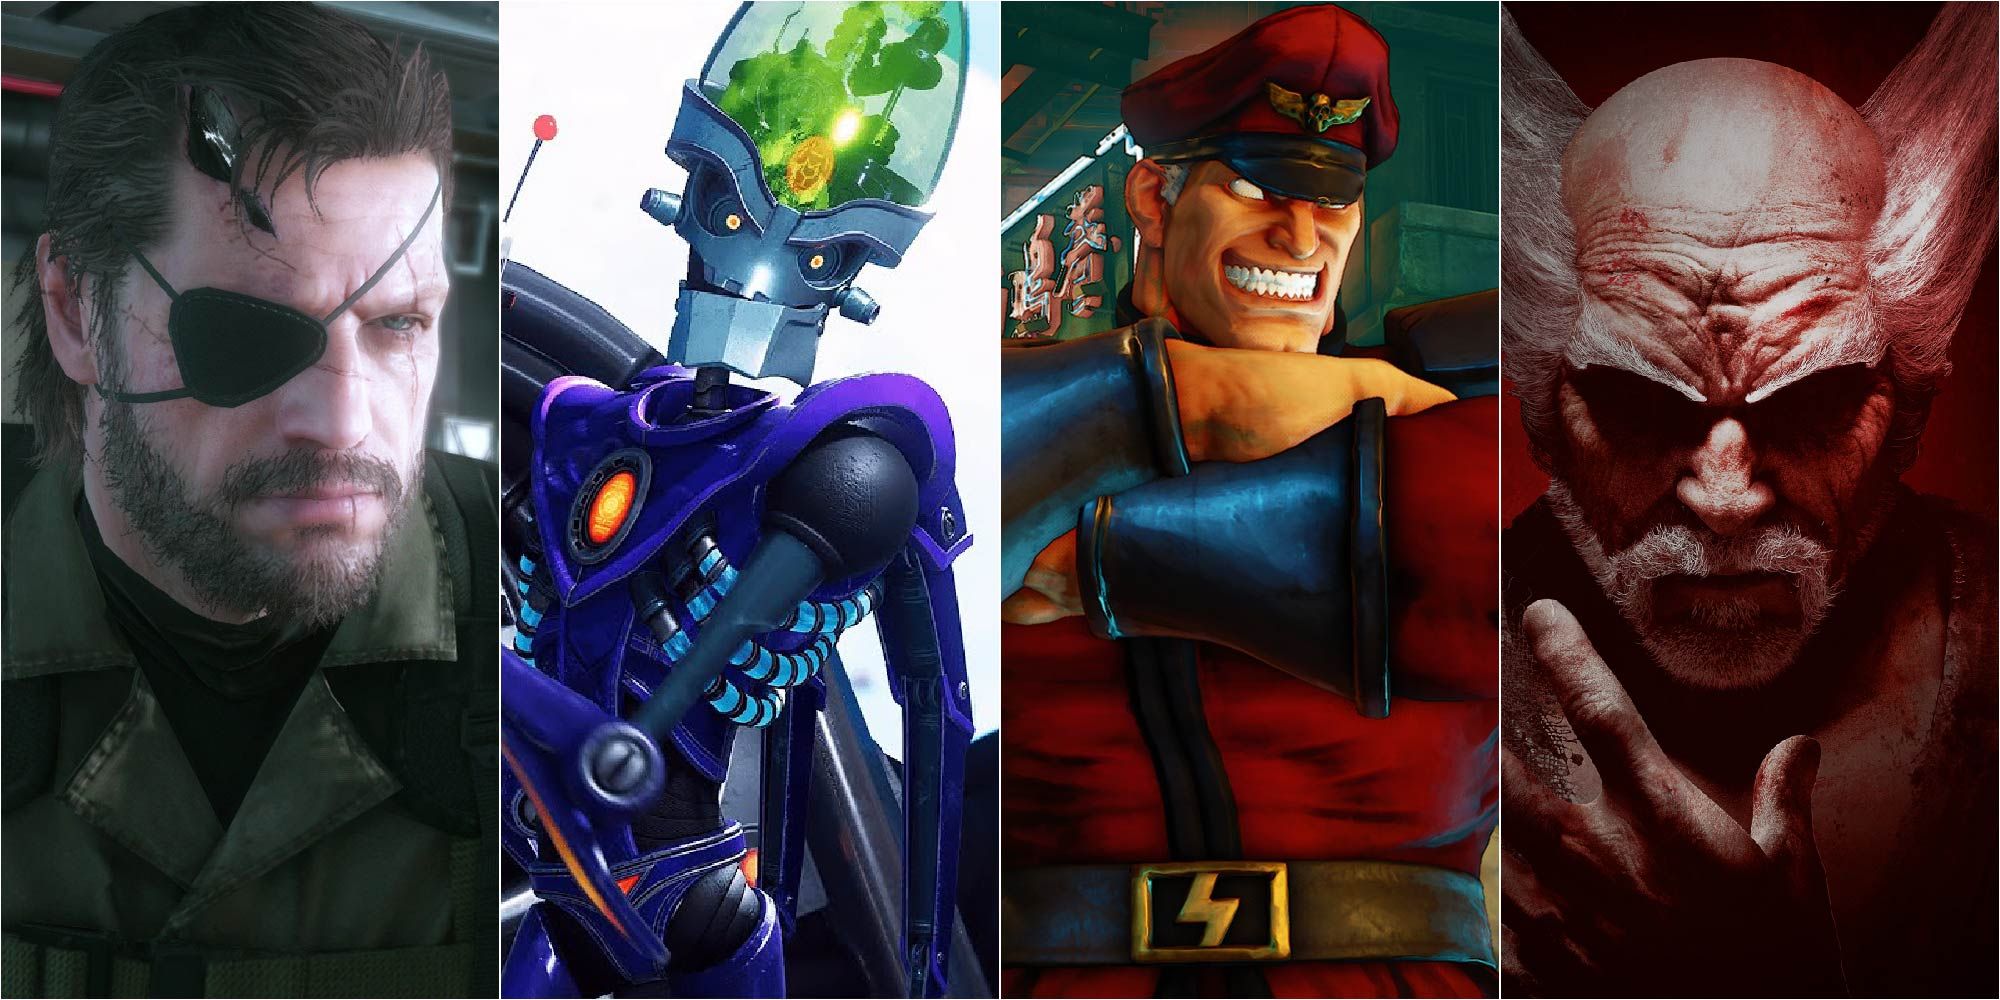 Solid Snake from Metal Gear Solid, Dr. Nefarious from Ratchet and Clank, M. Bison from Street Fighter and Heihachi from Tekken